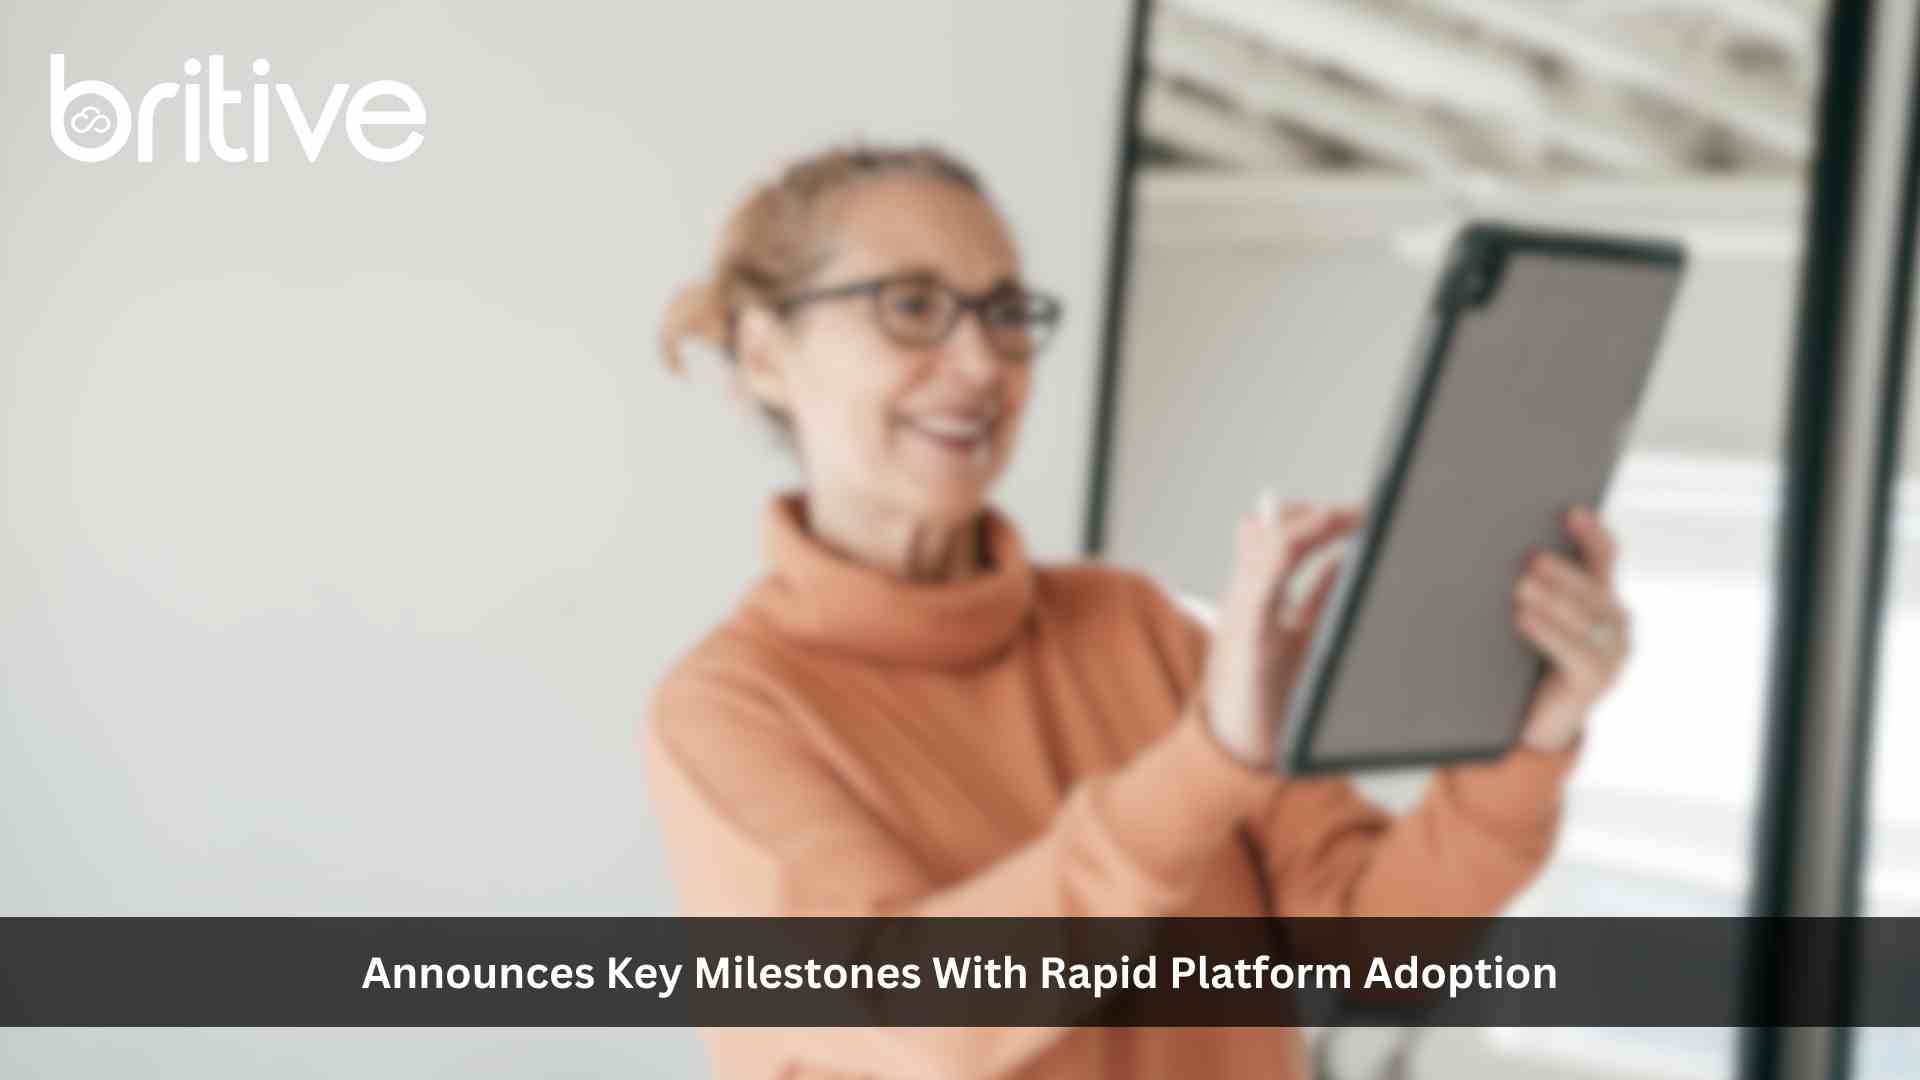 Britive Announces Key Milestones with Rapid Platform Adoption, Groundbreaking Patent, and Key Insights from the 2023 State of Cloud Identities and Privileges Report